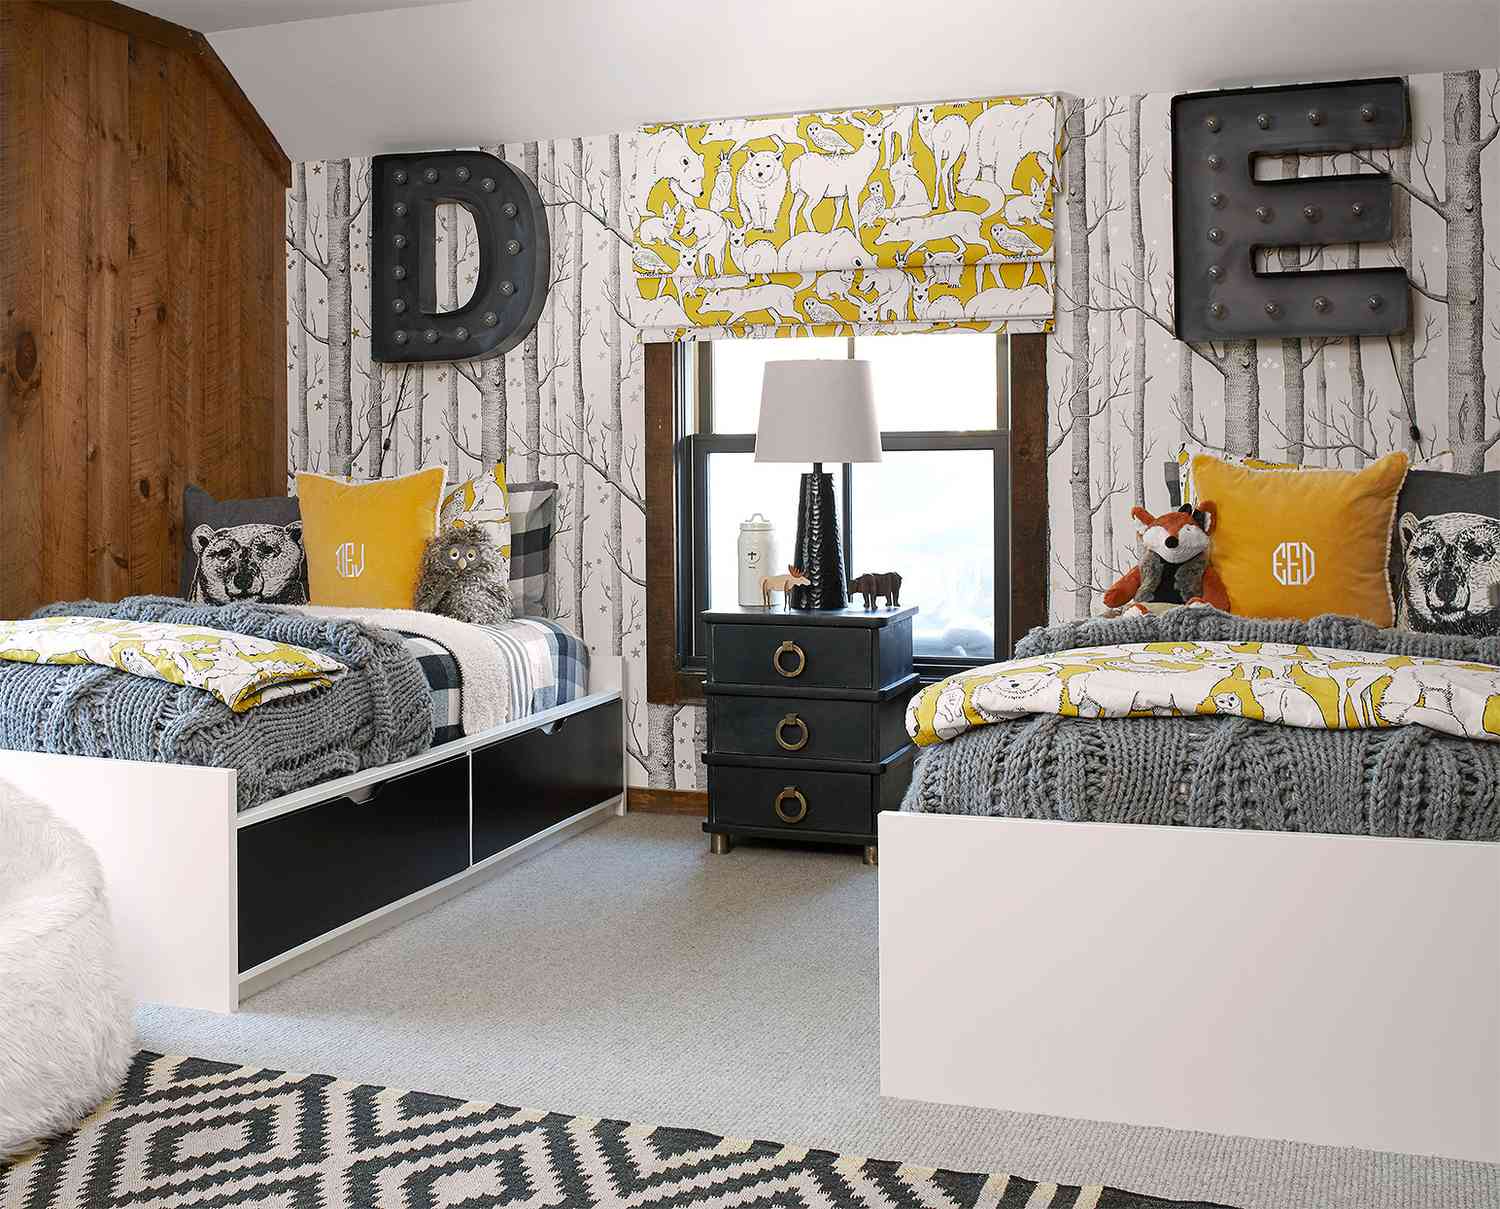 twin storage beds in kids bedroom with tree wallpaper, letter marquis decor and yellow accents